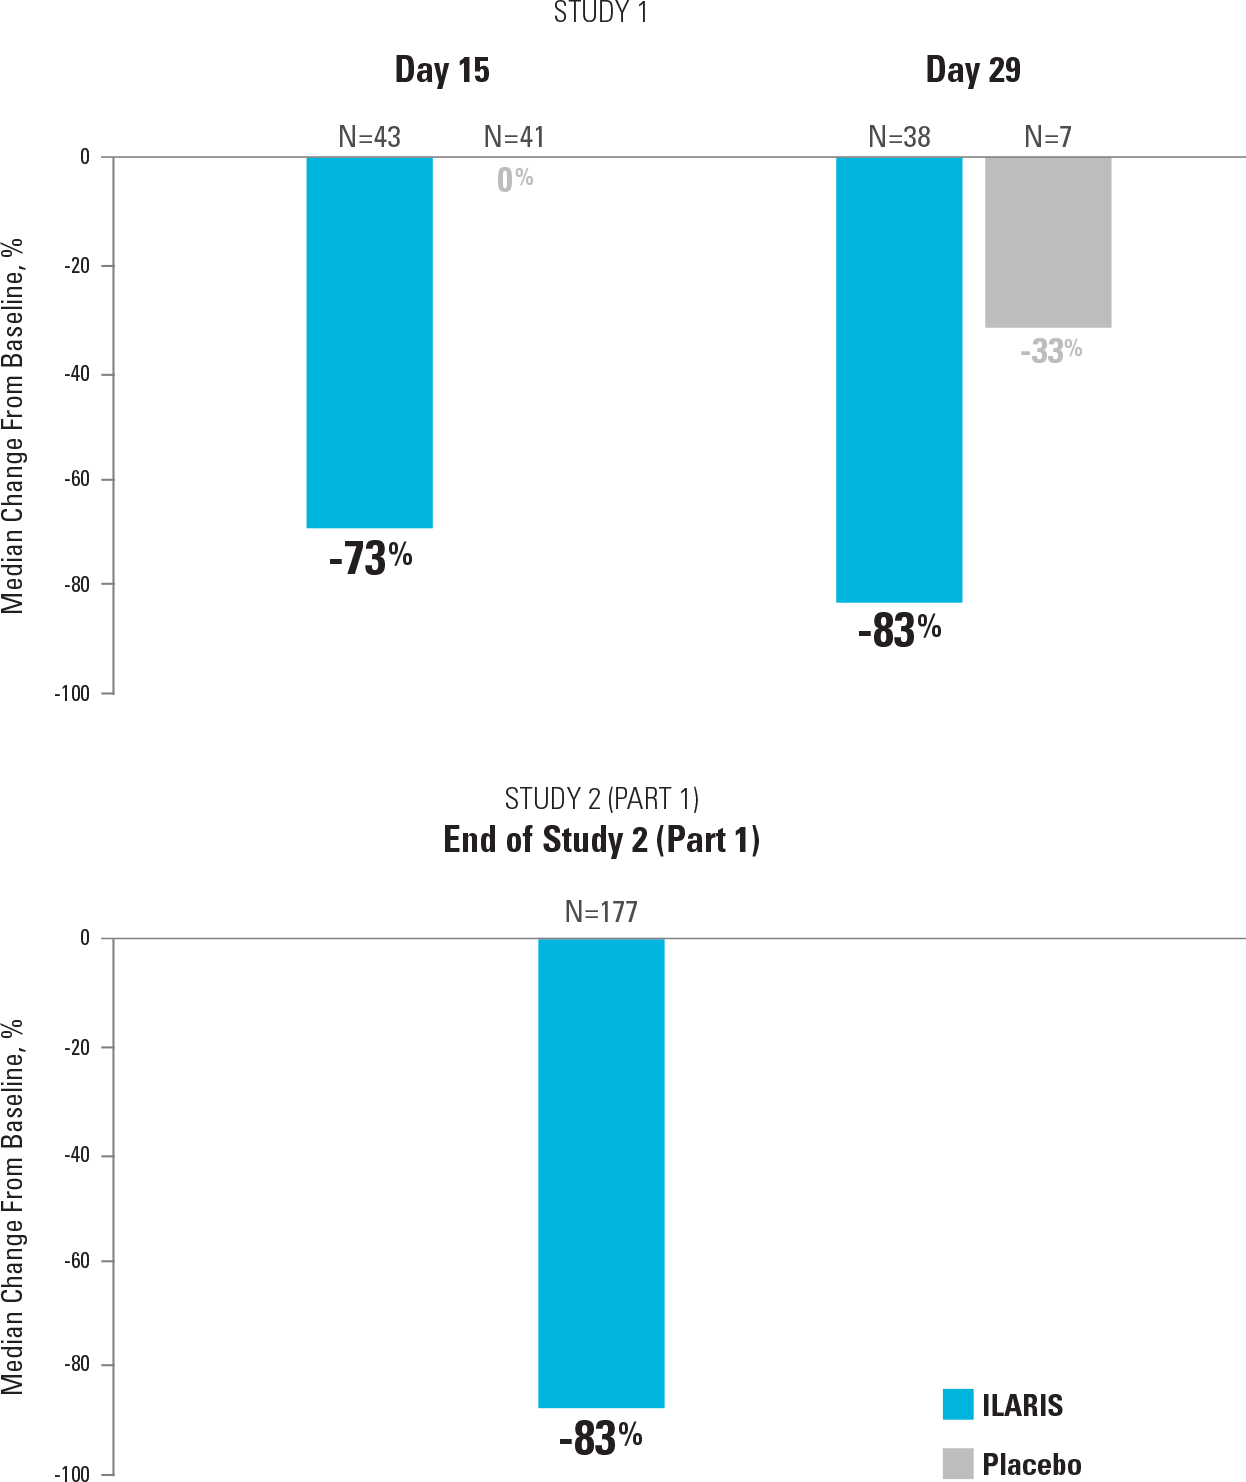 Graph depicting Median reduction in number of joints with limited range of motion in study 1 and study 2, part 1 (ILARIS vs placebo)